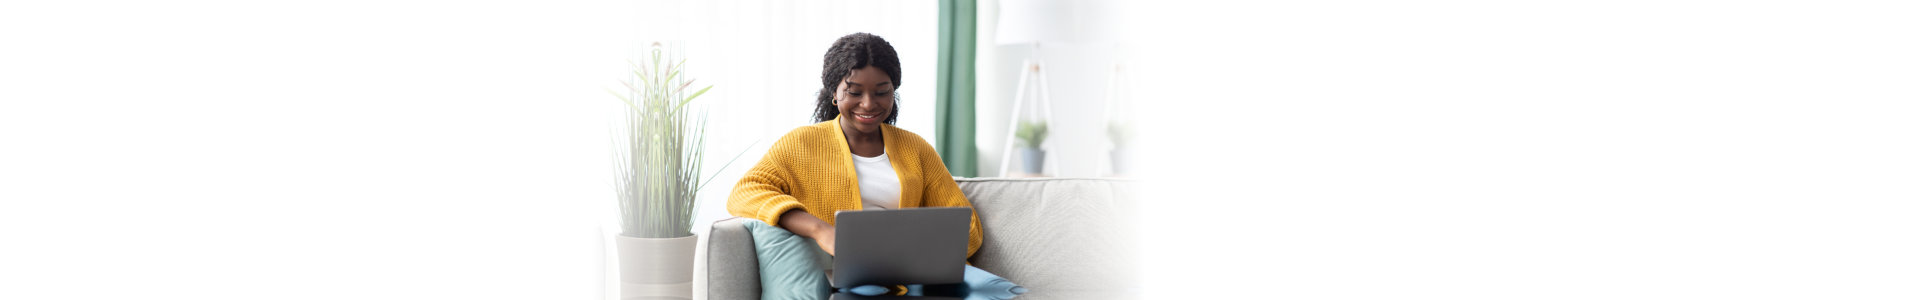 woman using laptop and smiling